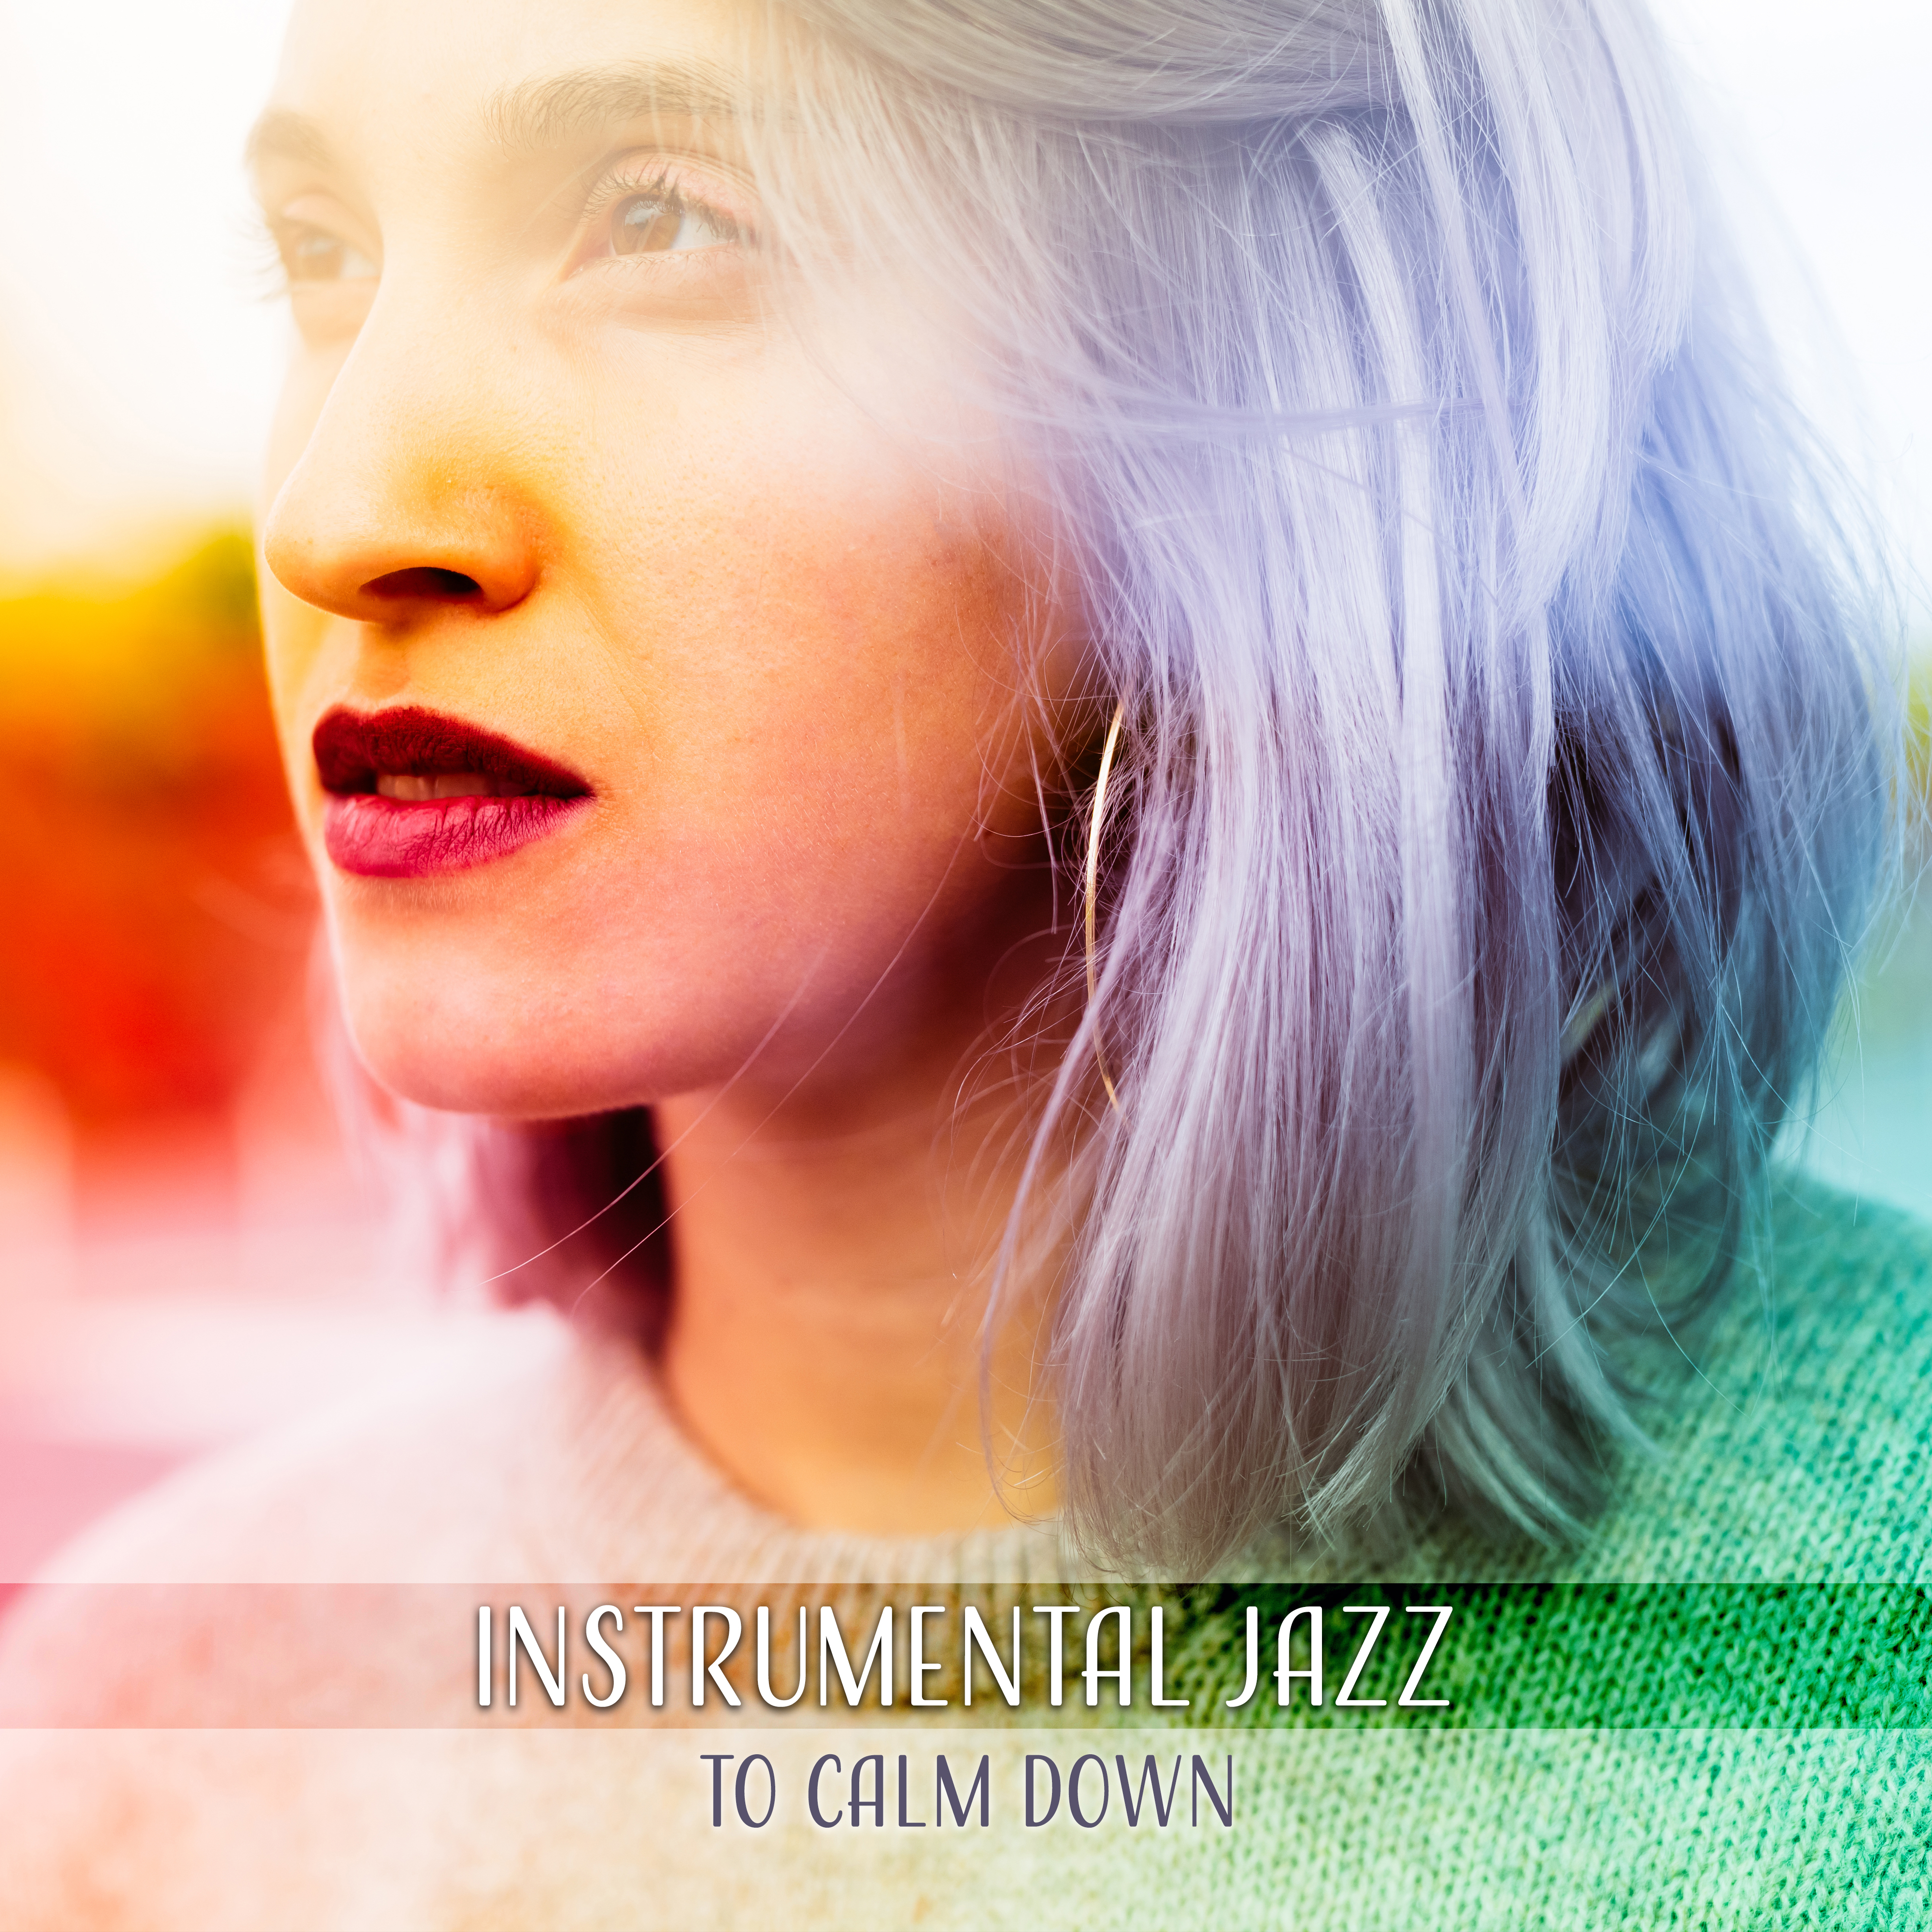 Instrumental Jazz to Calm Down – Soft Sounds of Jazz, Peaceful Music, Smooth Piano Melodies, Rest with Jazz